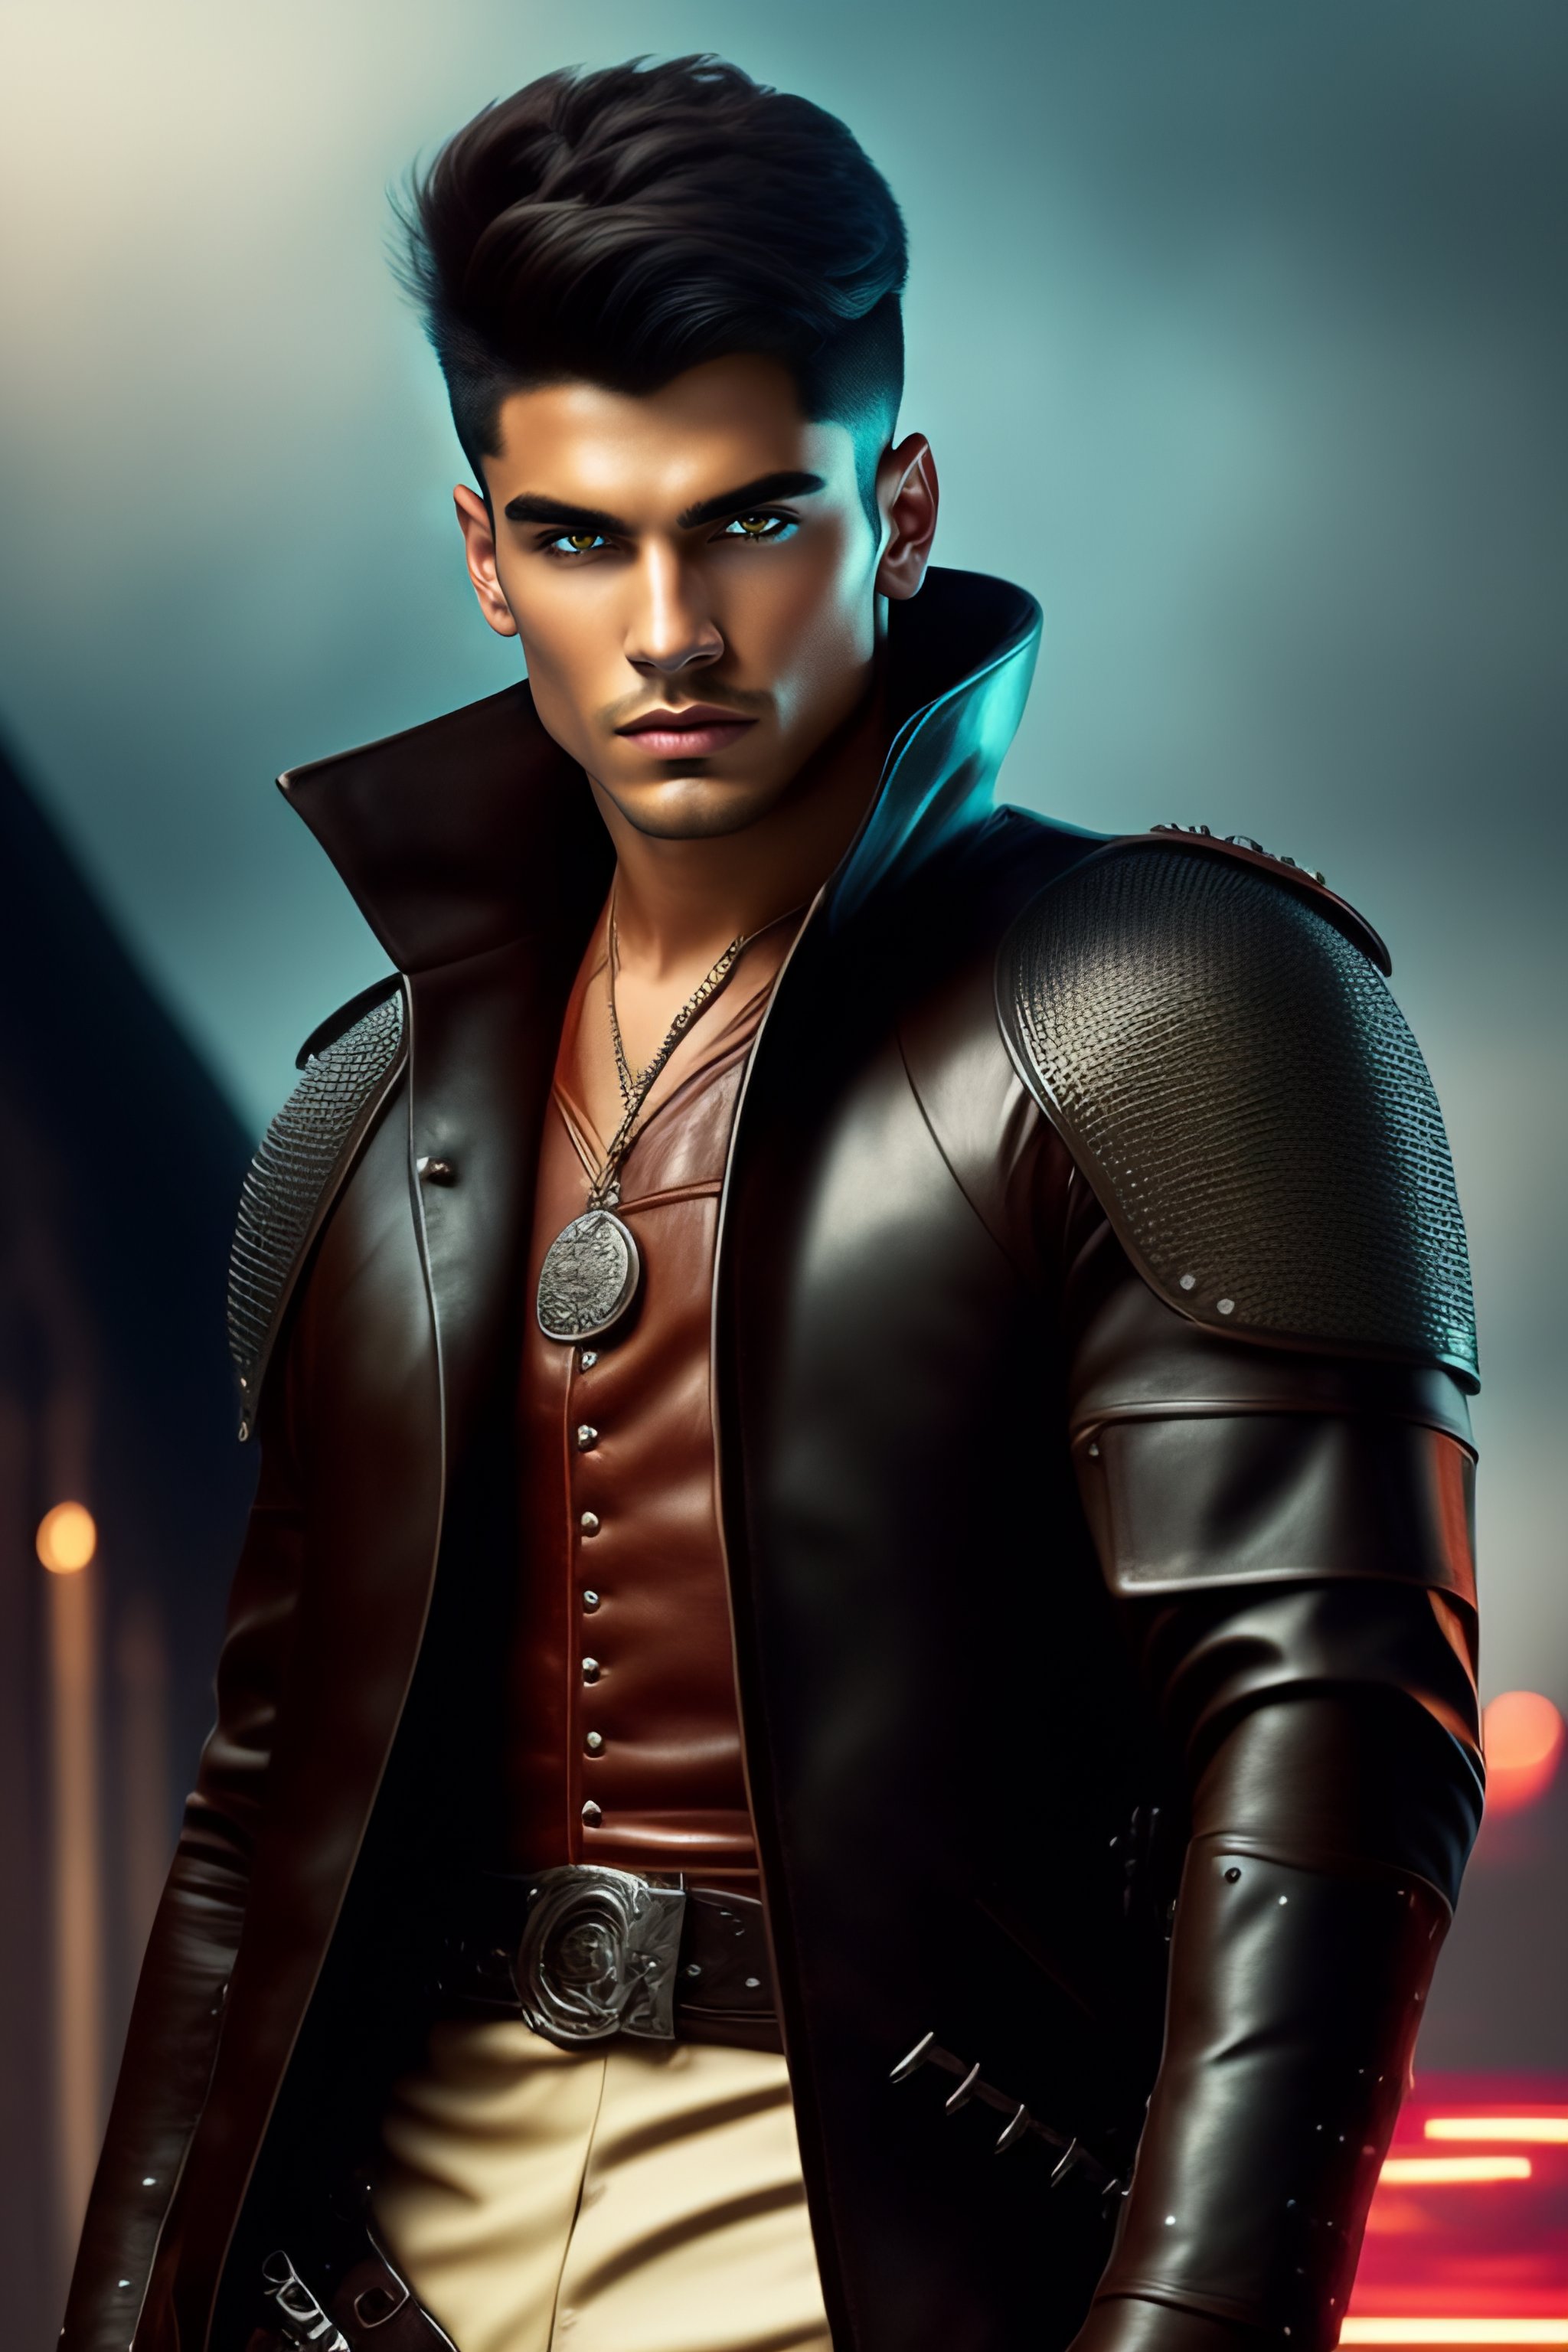 Lexica - Young men short-haired medieval outlaw in leather jacket with ...